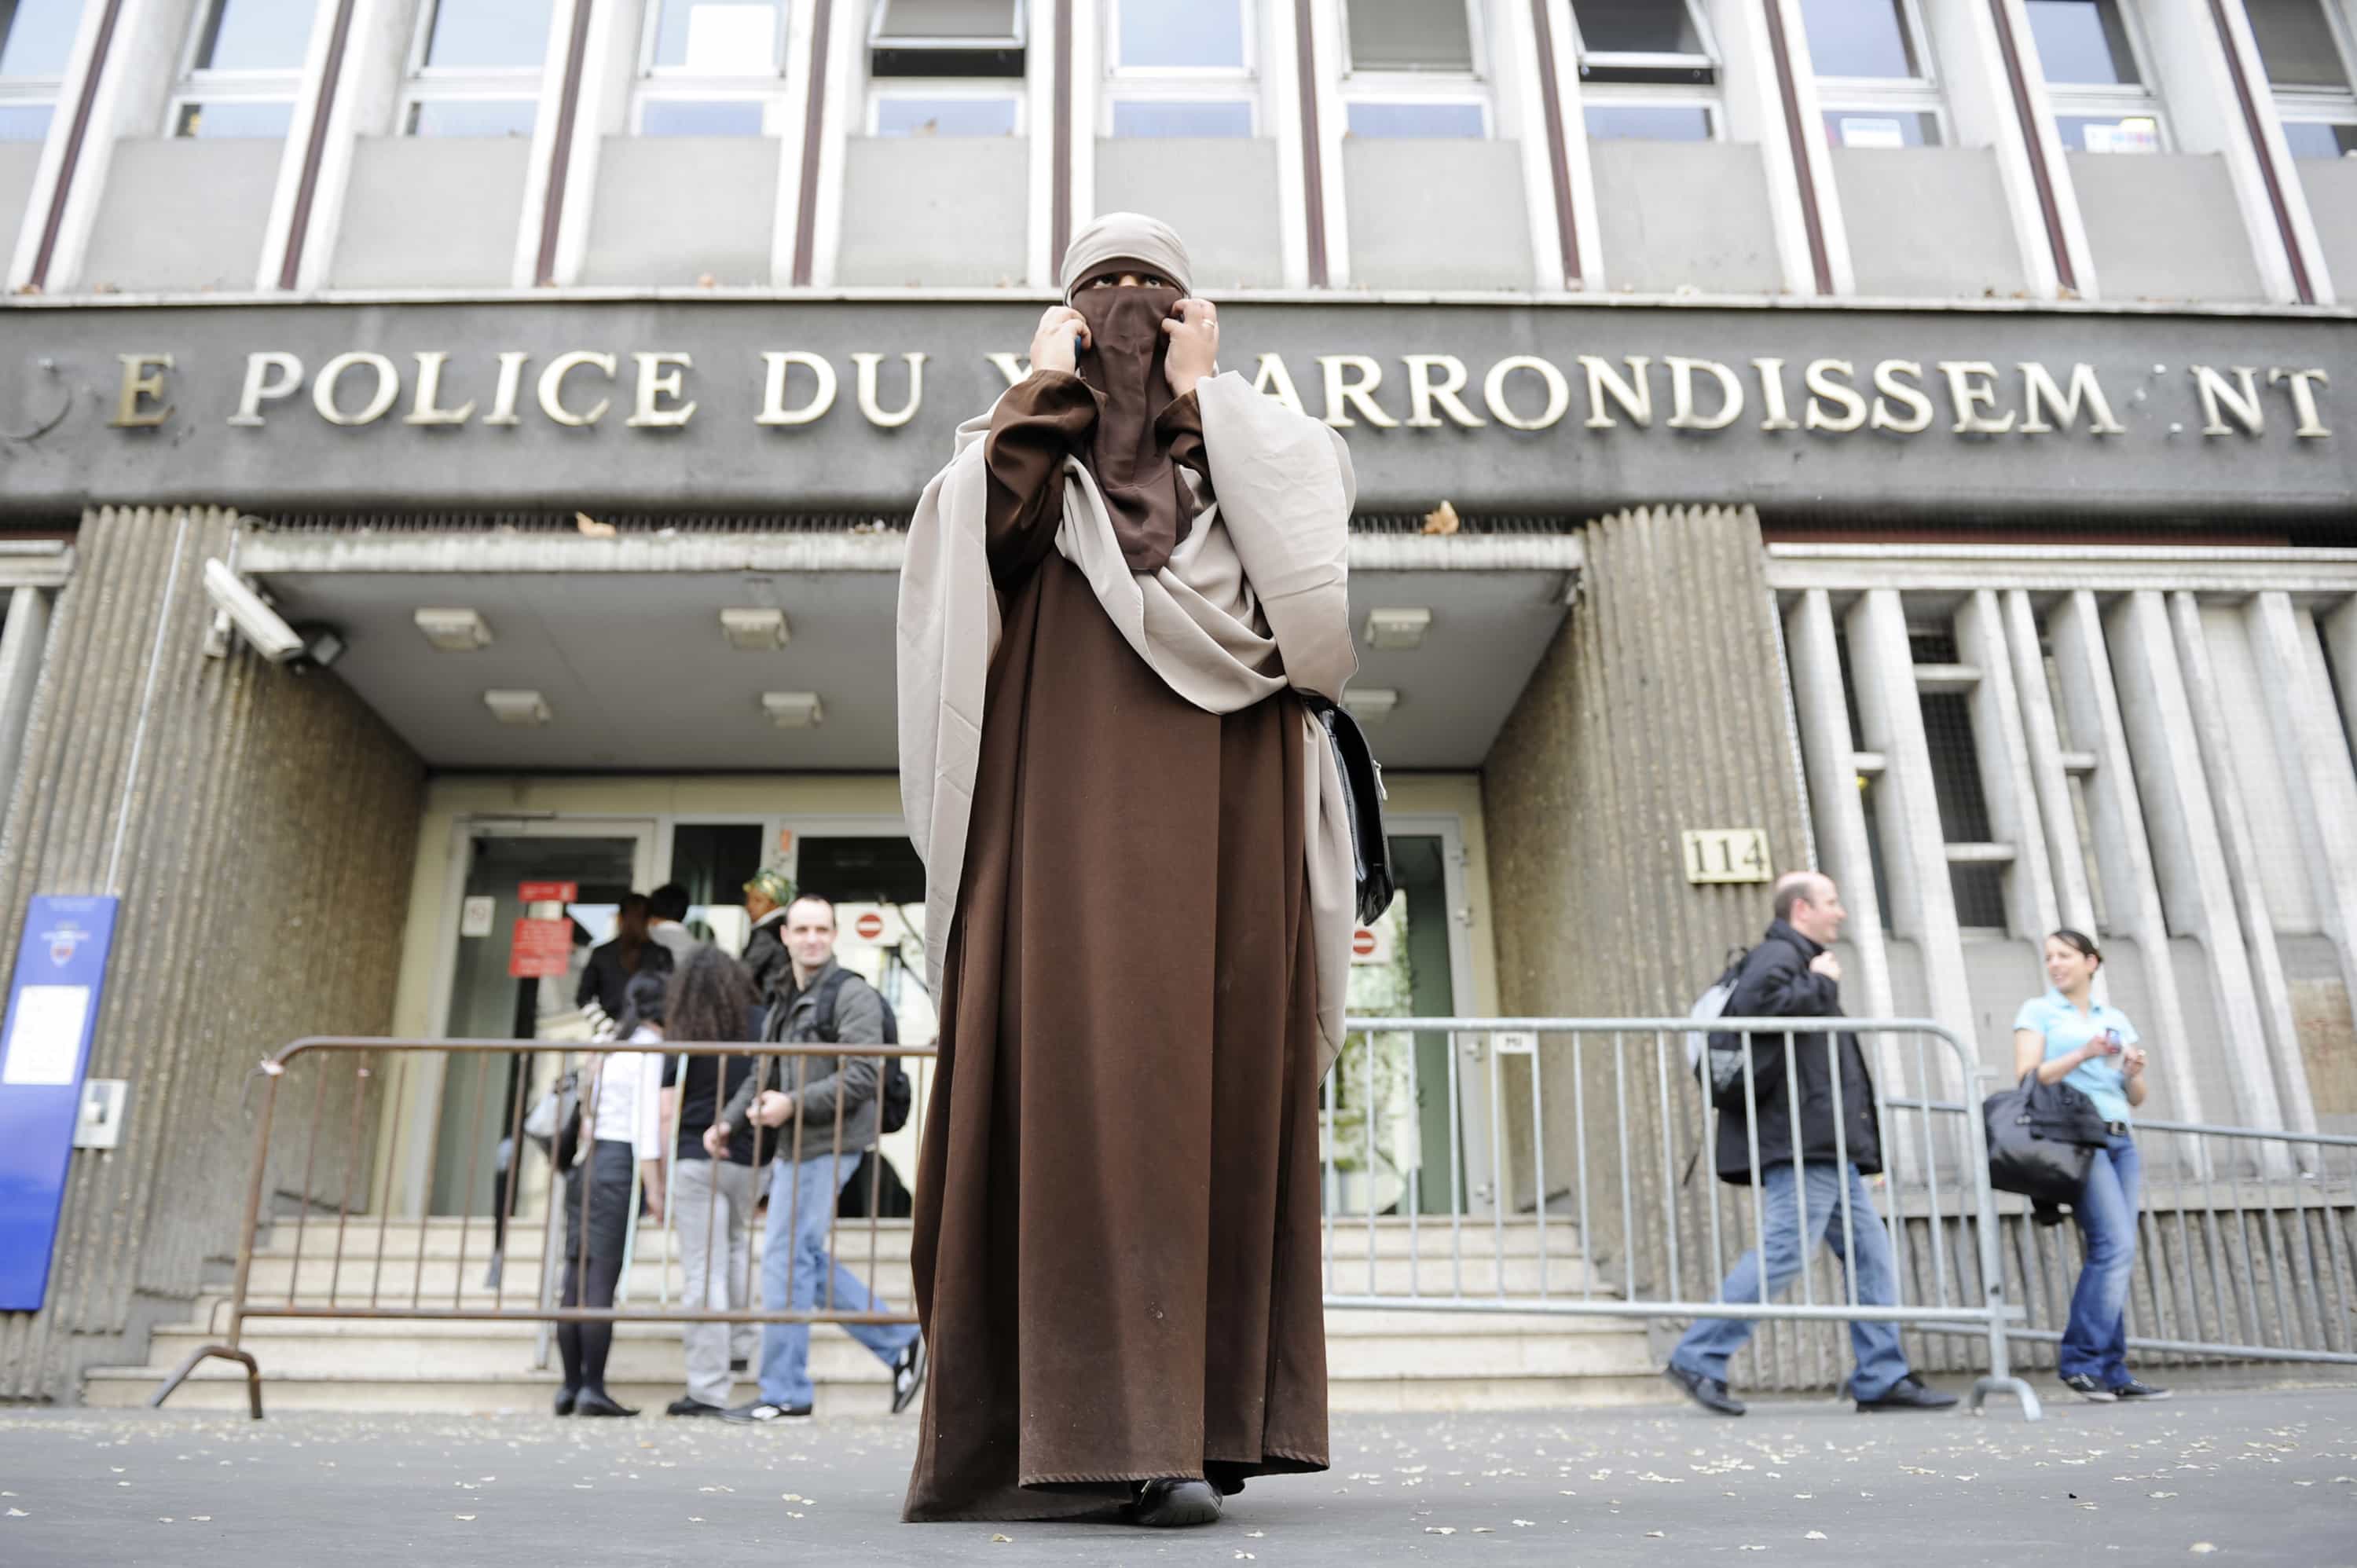 Kenza Drider, a French Muslim of North African descent, wearing a niqab, speaks on the phone after her release from a police station in Paris, 11 April 2011, REUTERS/Gonzalo Fuentes